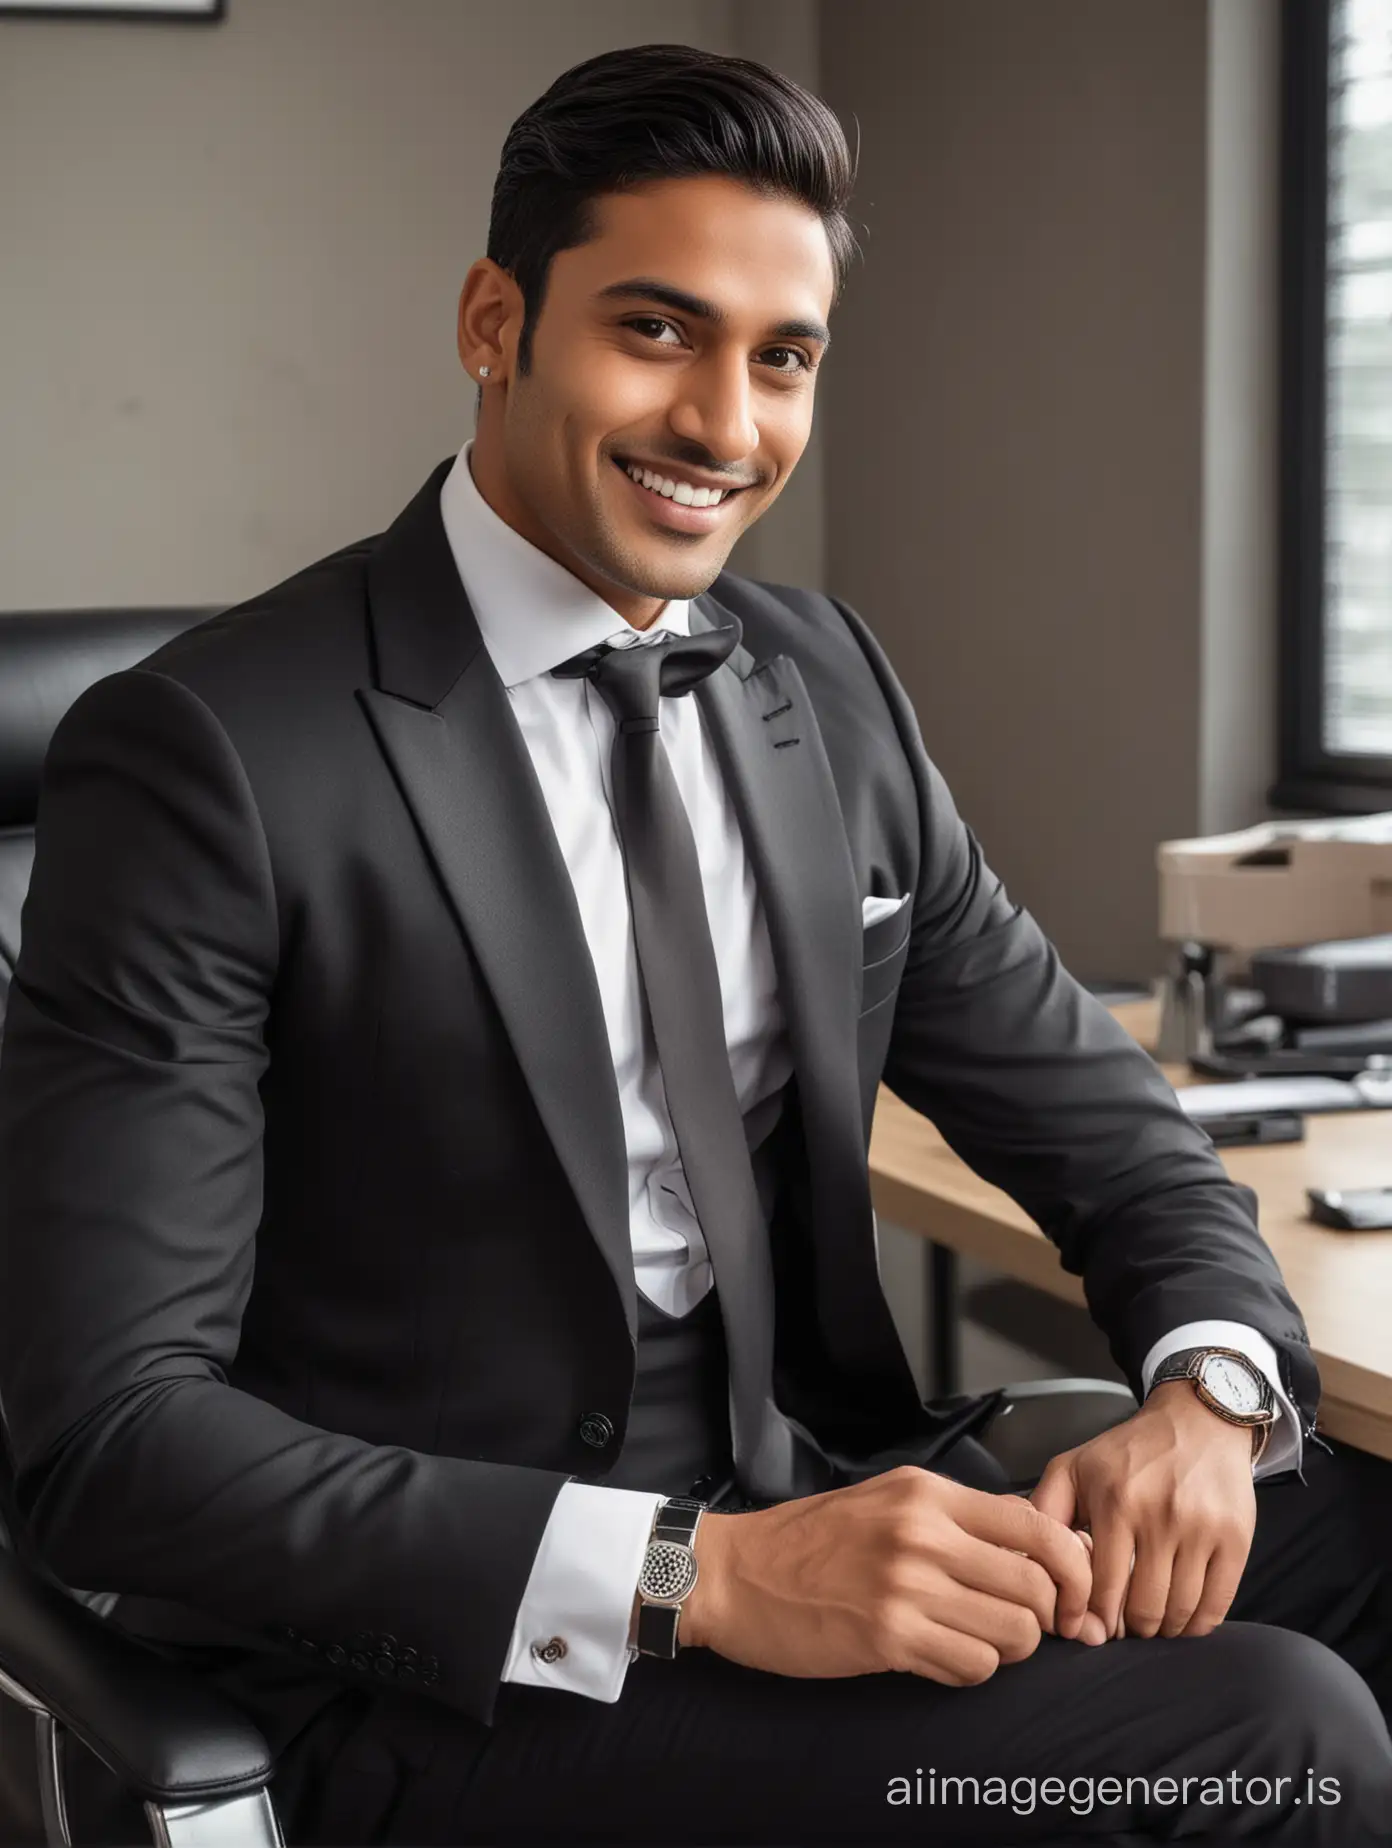 Sophisticated-Indian-Man-in-Black-Tuxedo-Smiling-and-Relaxed